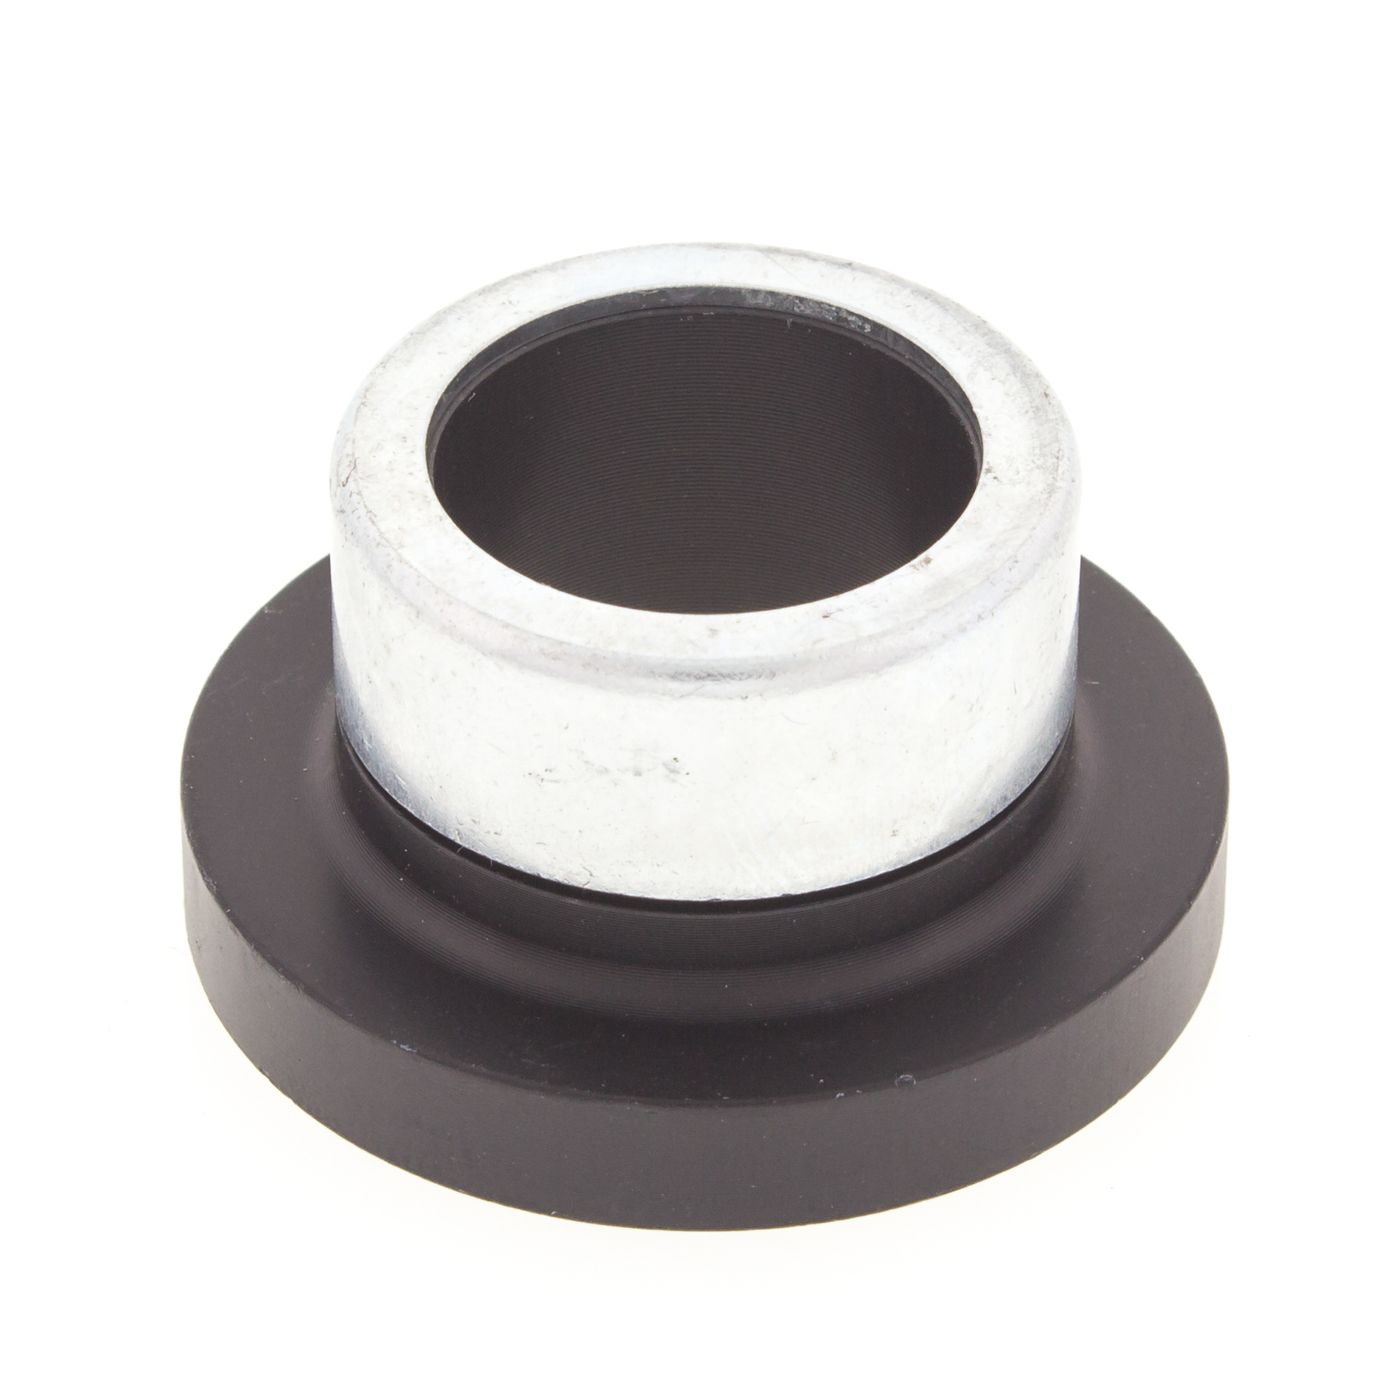 Wrp Rear Wheel Spacer Kits - WRP111078-1 image